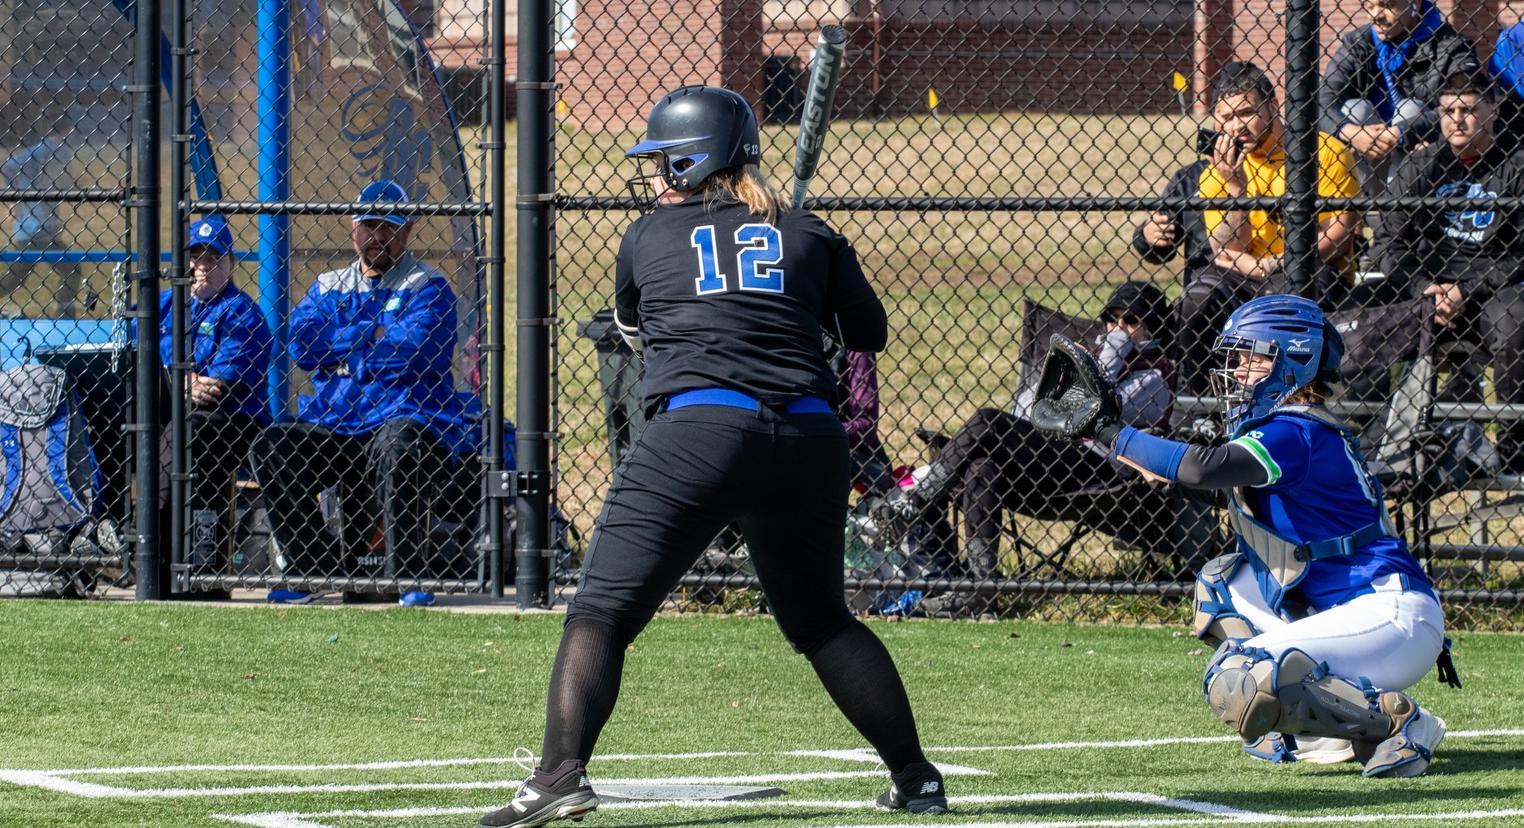 Emily White enjoyed a scorching day at the plate in the third day of Brevard's run in the Fastpitch Dreams Spring Classic, 5-for-7 with five doubles, three runs, and three RBI's as BC extended its winning streak to five games (Photo courtesy of Victoria Brayman '22).